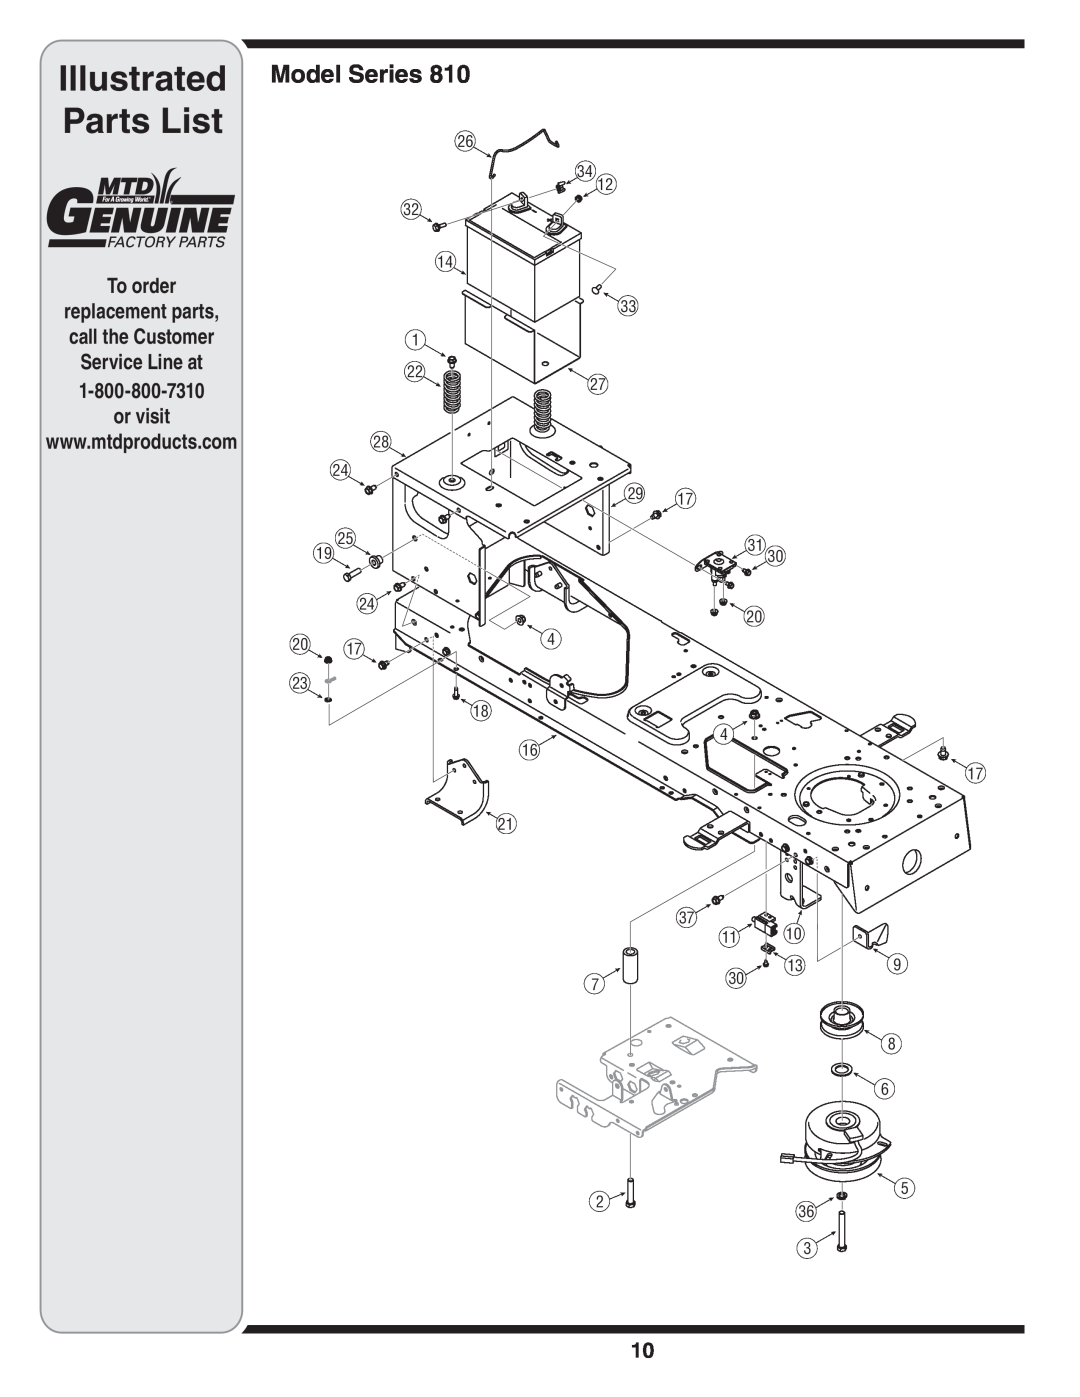 MTD 810 Illustrated Parts List, Model Series, To order, or visit, replacement parts, call the Customer Service Line at 